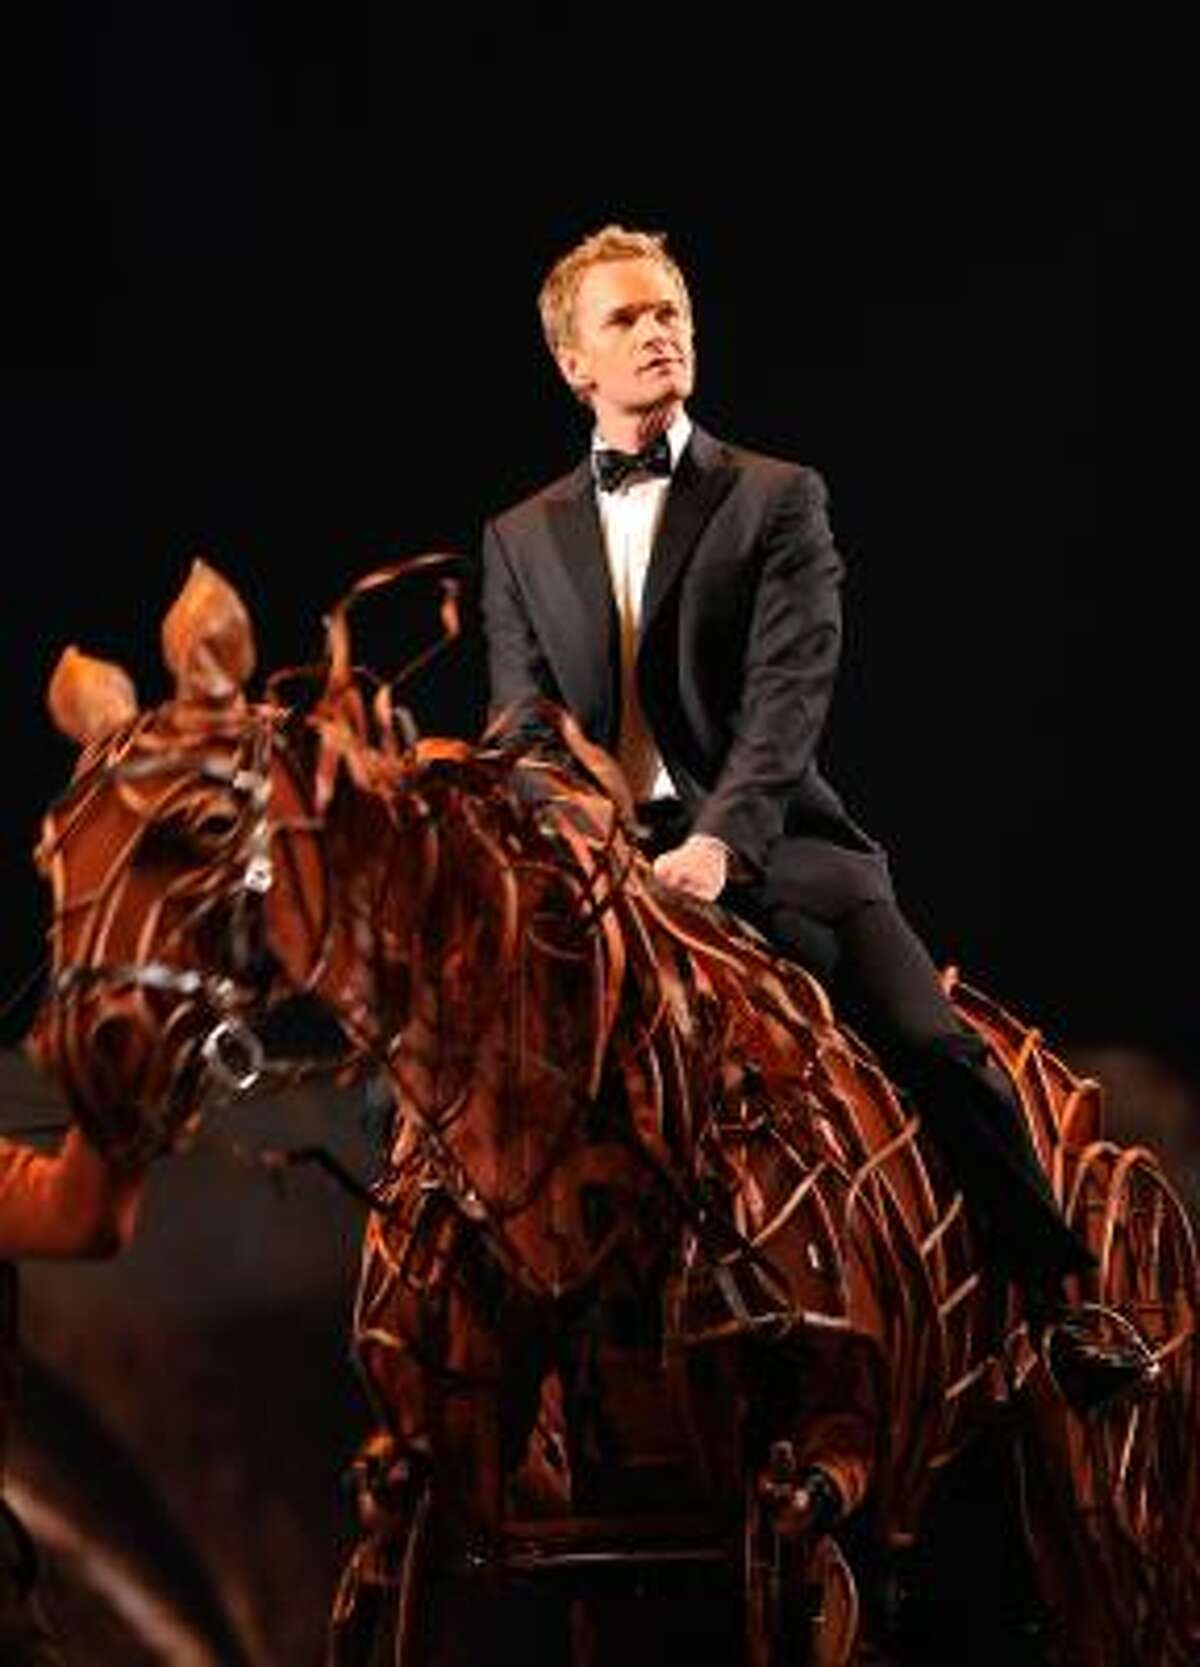 A puppet from War Horse takes host Neil Patrick Harris to the stage.